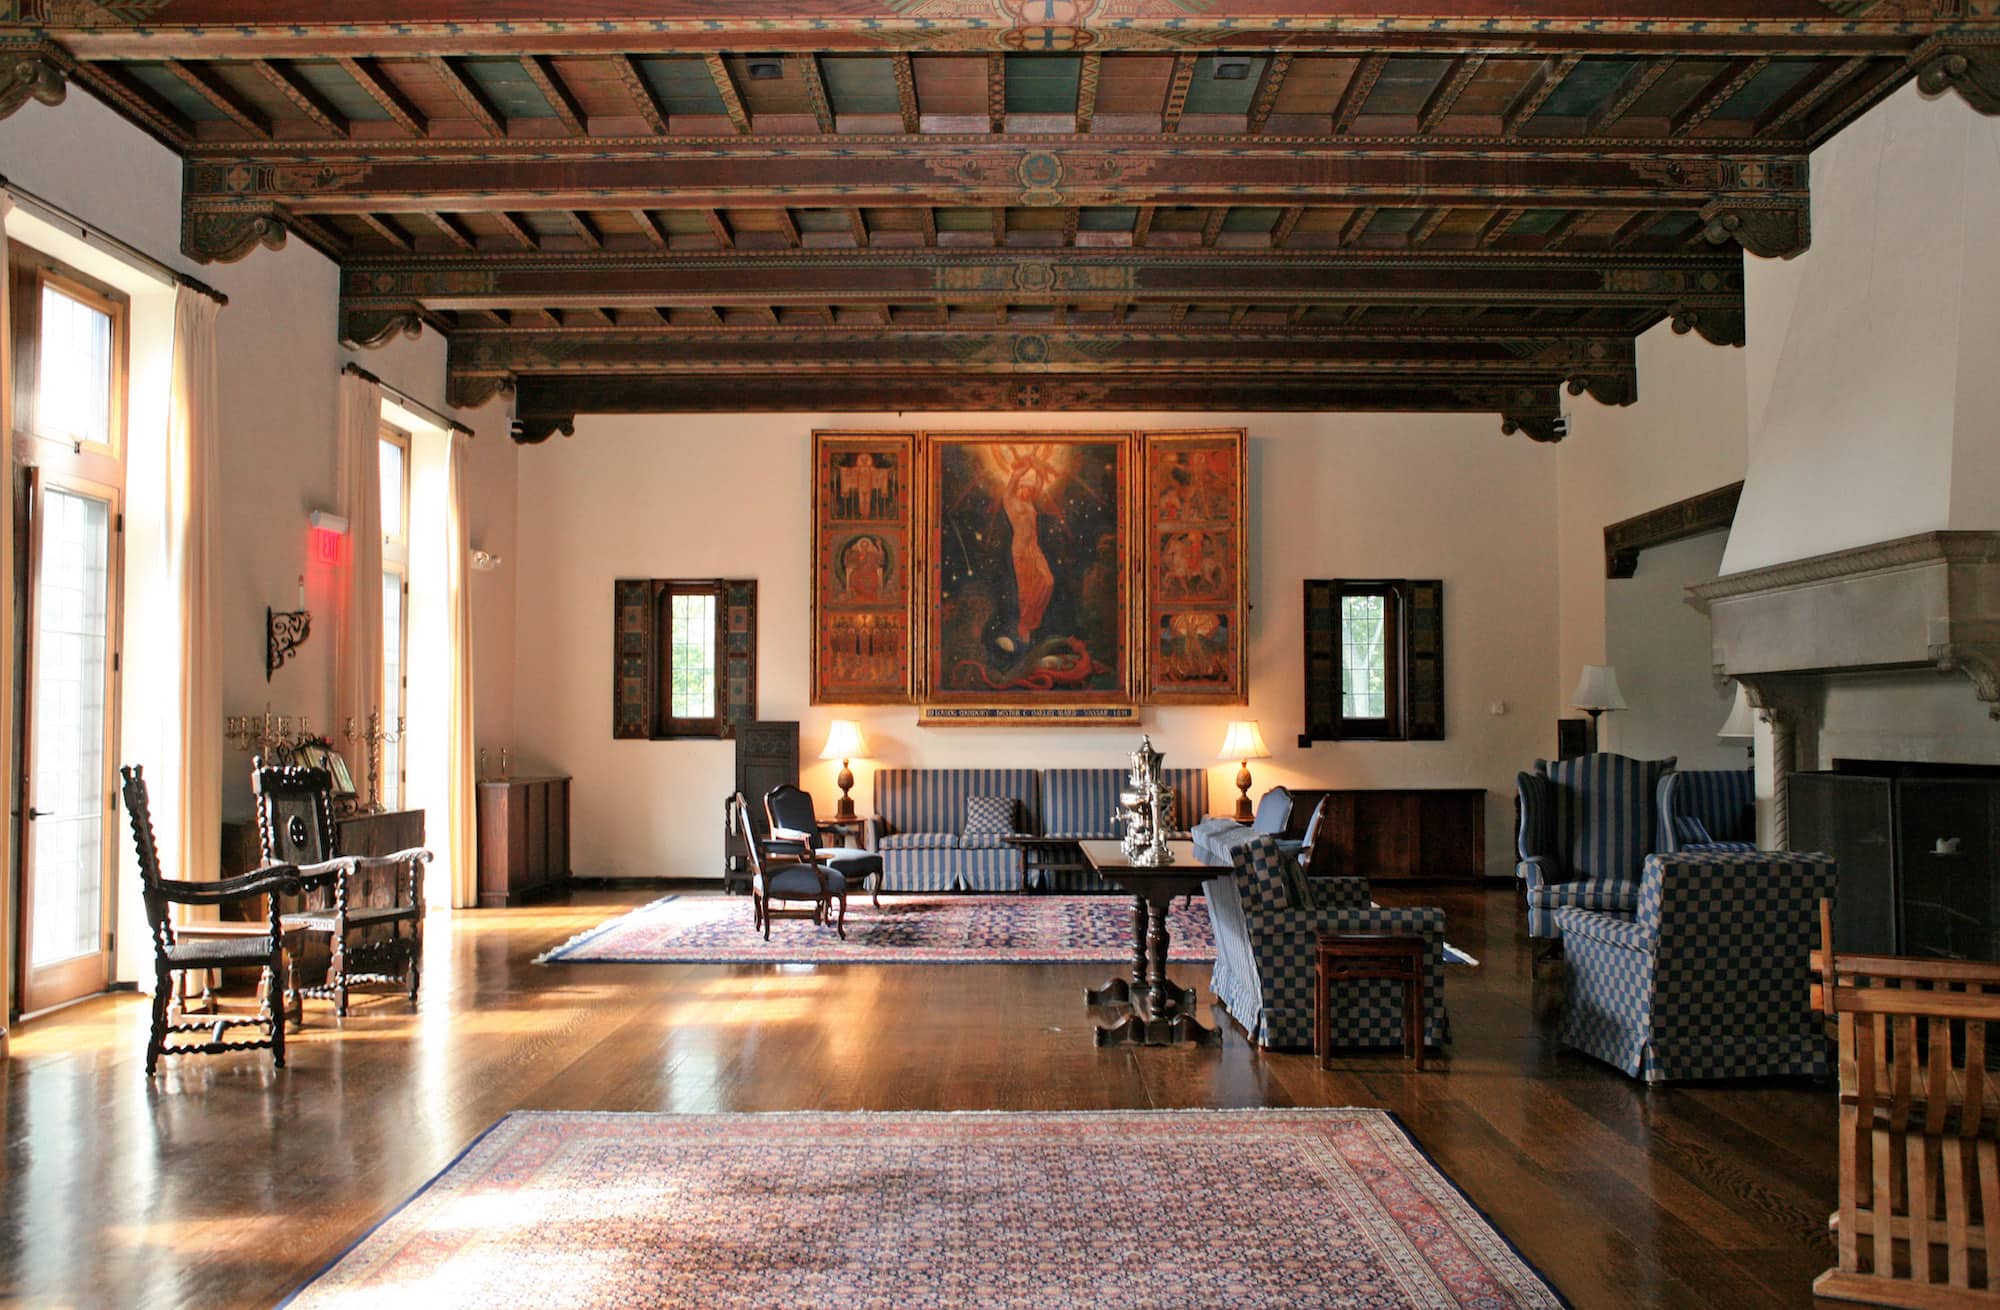 A common area inside Alumnae House on the Vassar campus, a wide space with a patterned wooden ceiling, various seating spaces, and a large painting hanging on the far wall of the room.